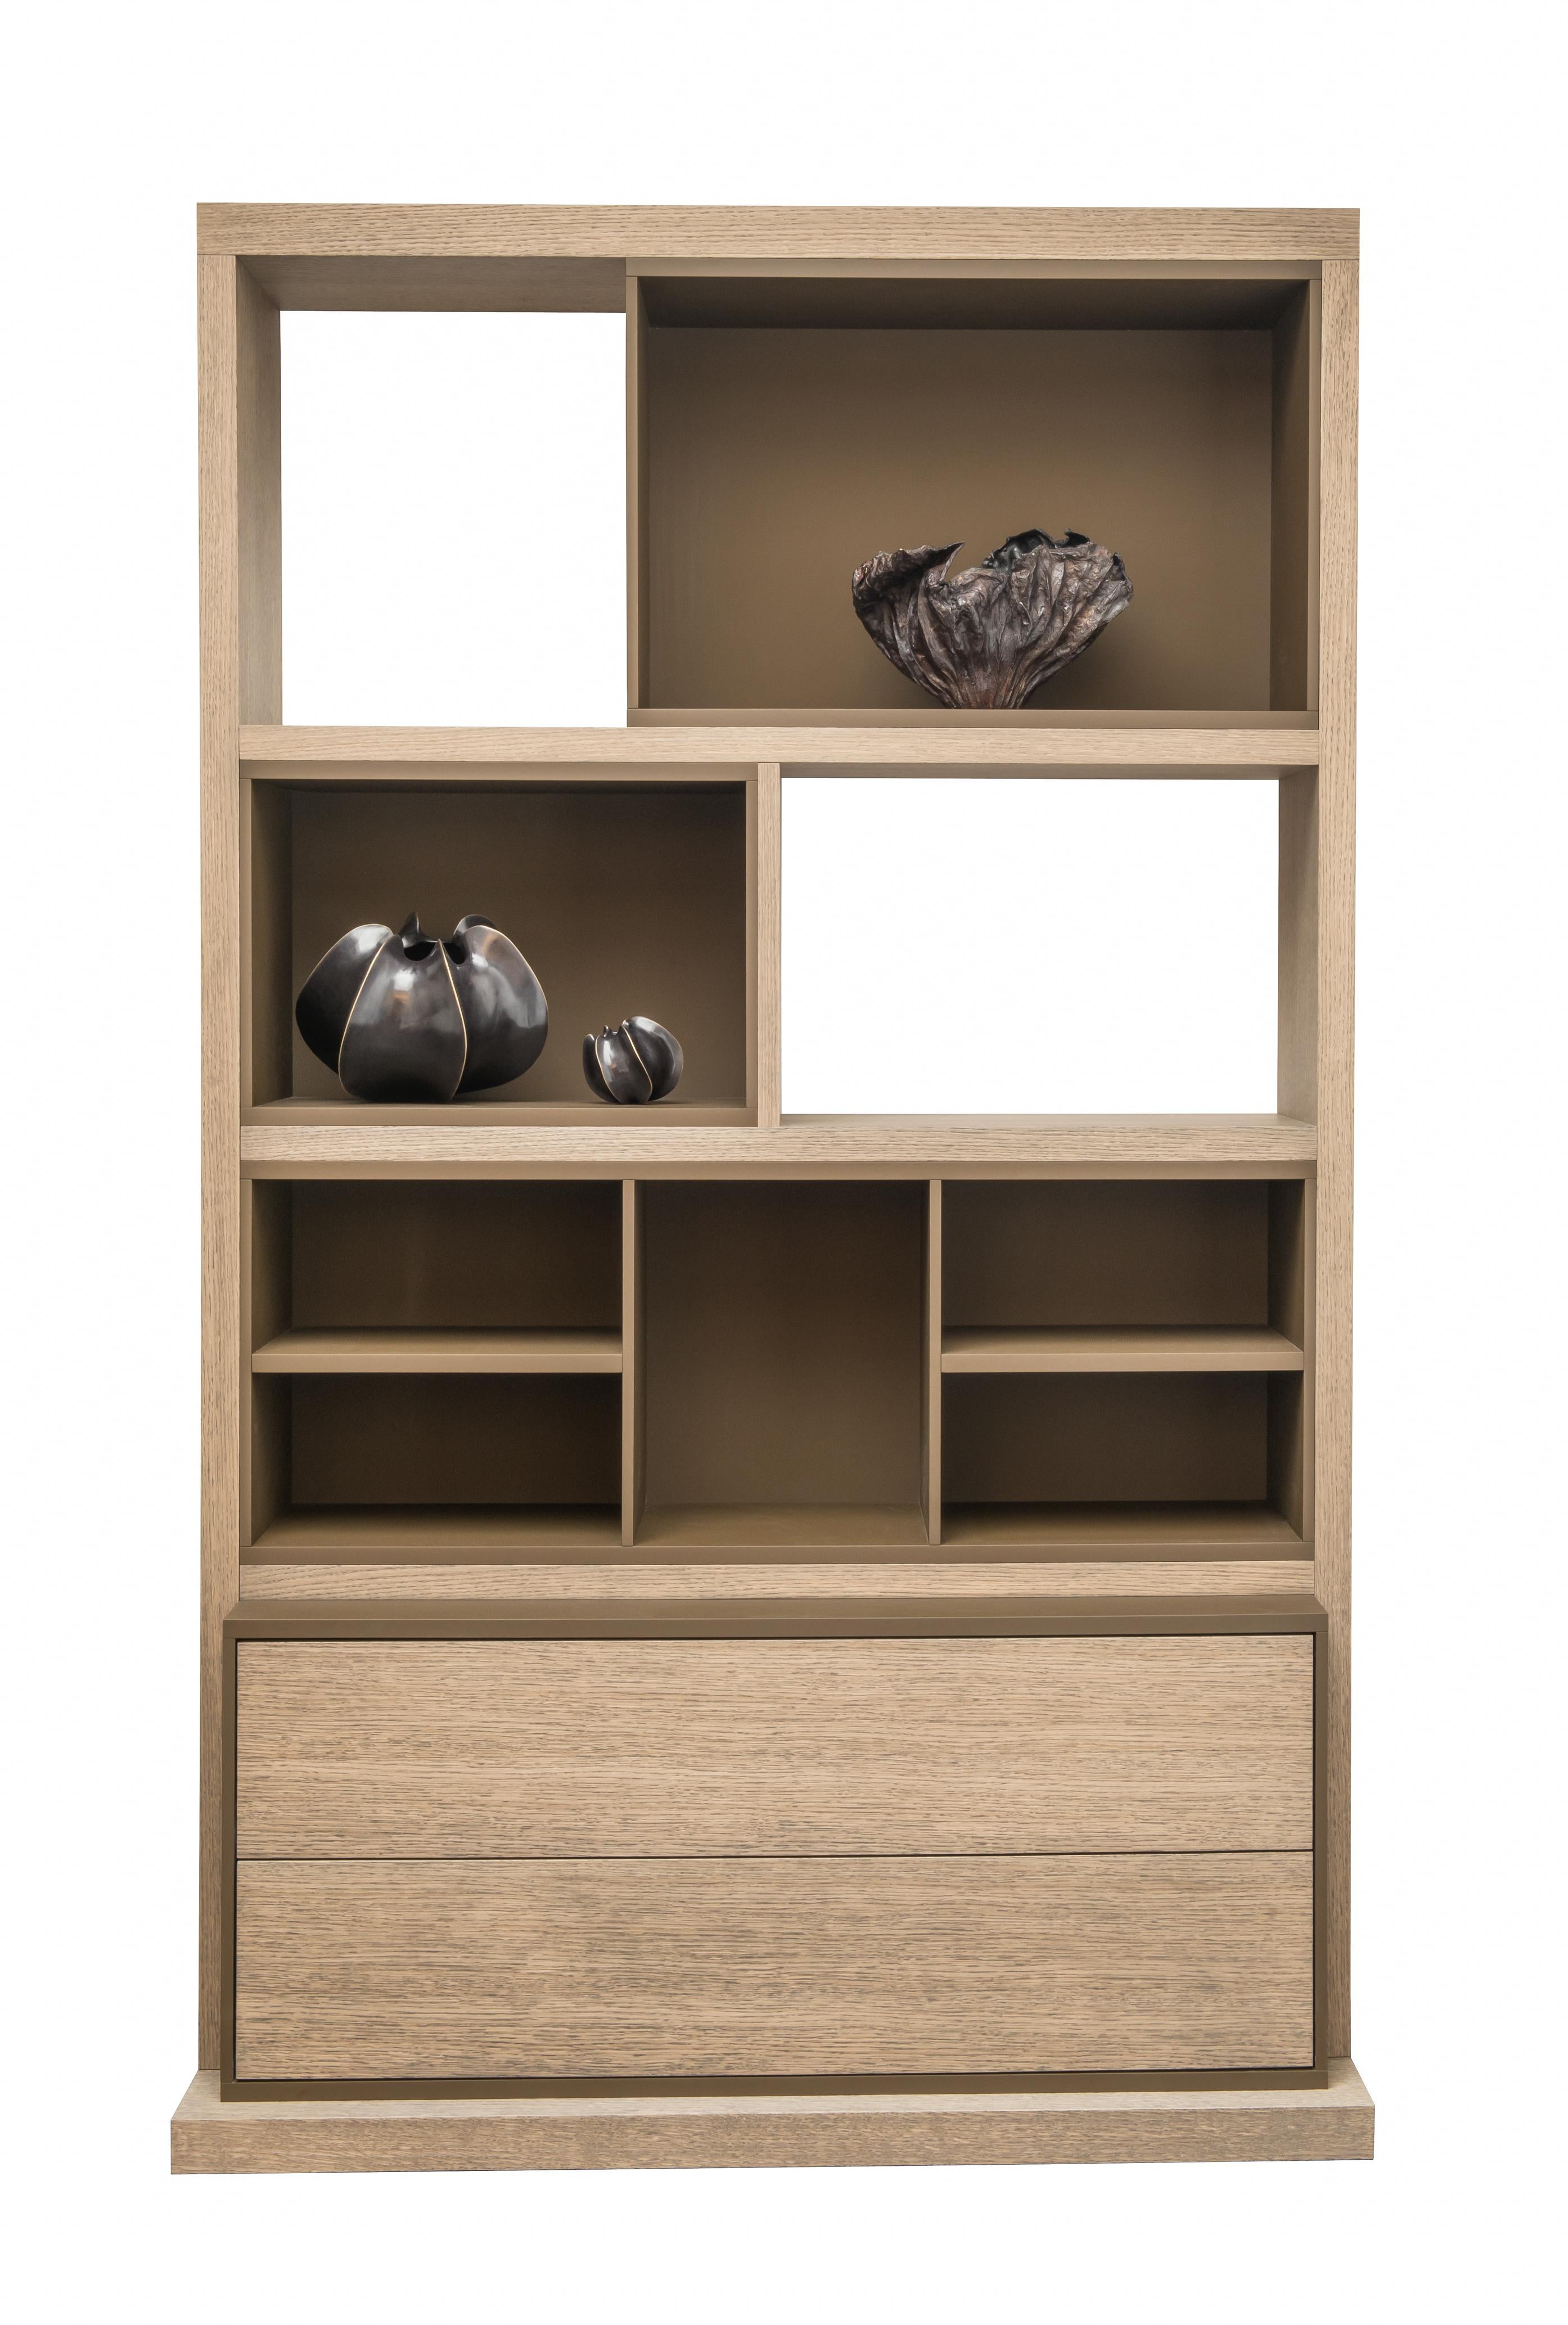 The bookcase is designed by the Atelier Linné collective, with shelves made of oak and the bottom in matte lacquer. It is characterized by both its symmetrical and asymmetrical sides and includes two drawers on the width in the lower part.

Atelier